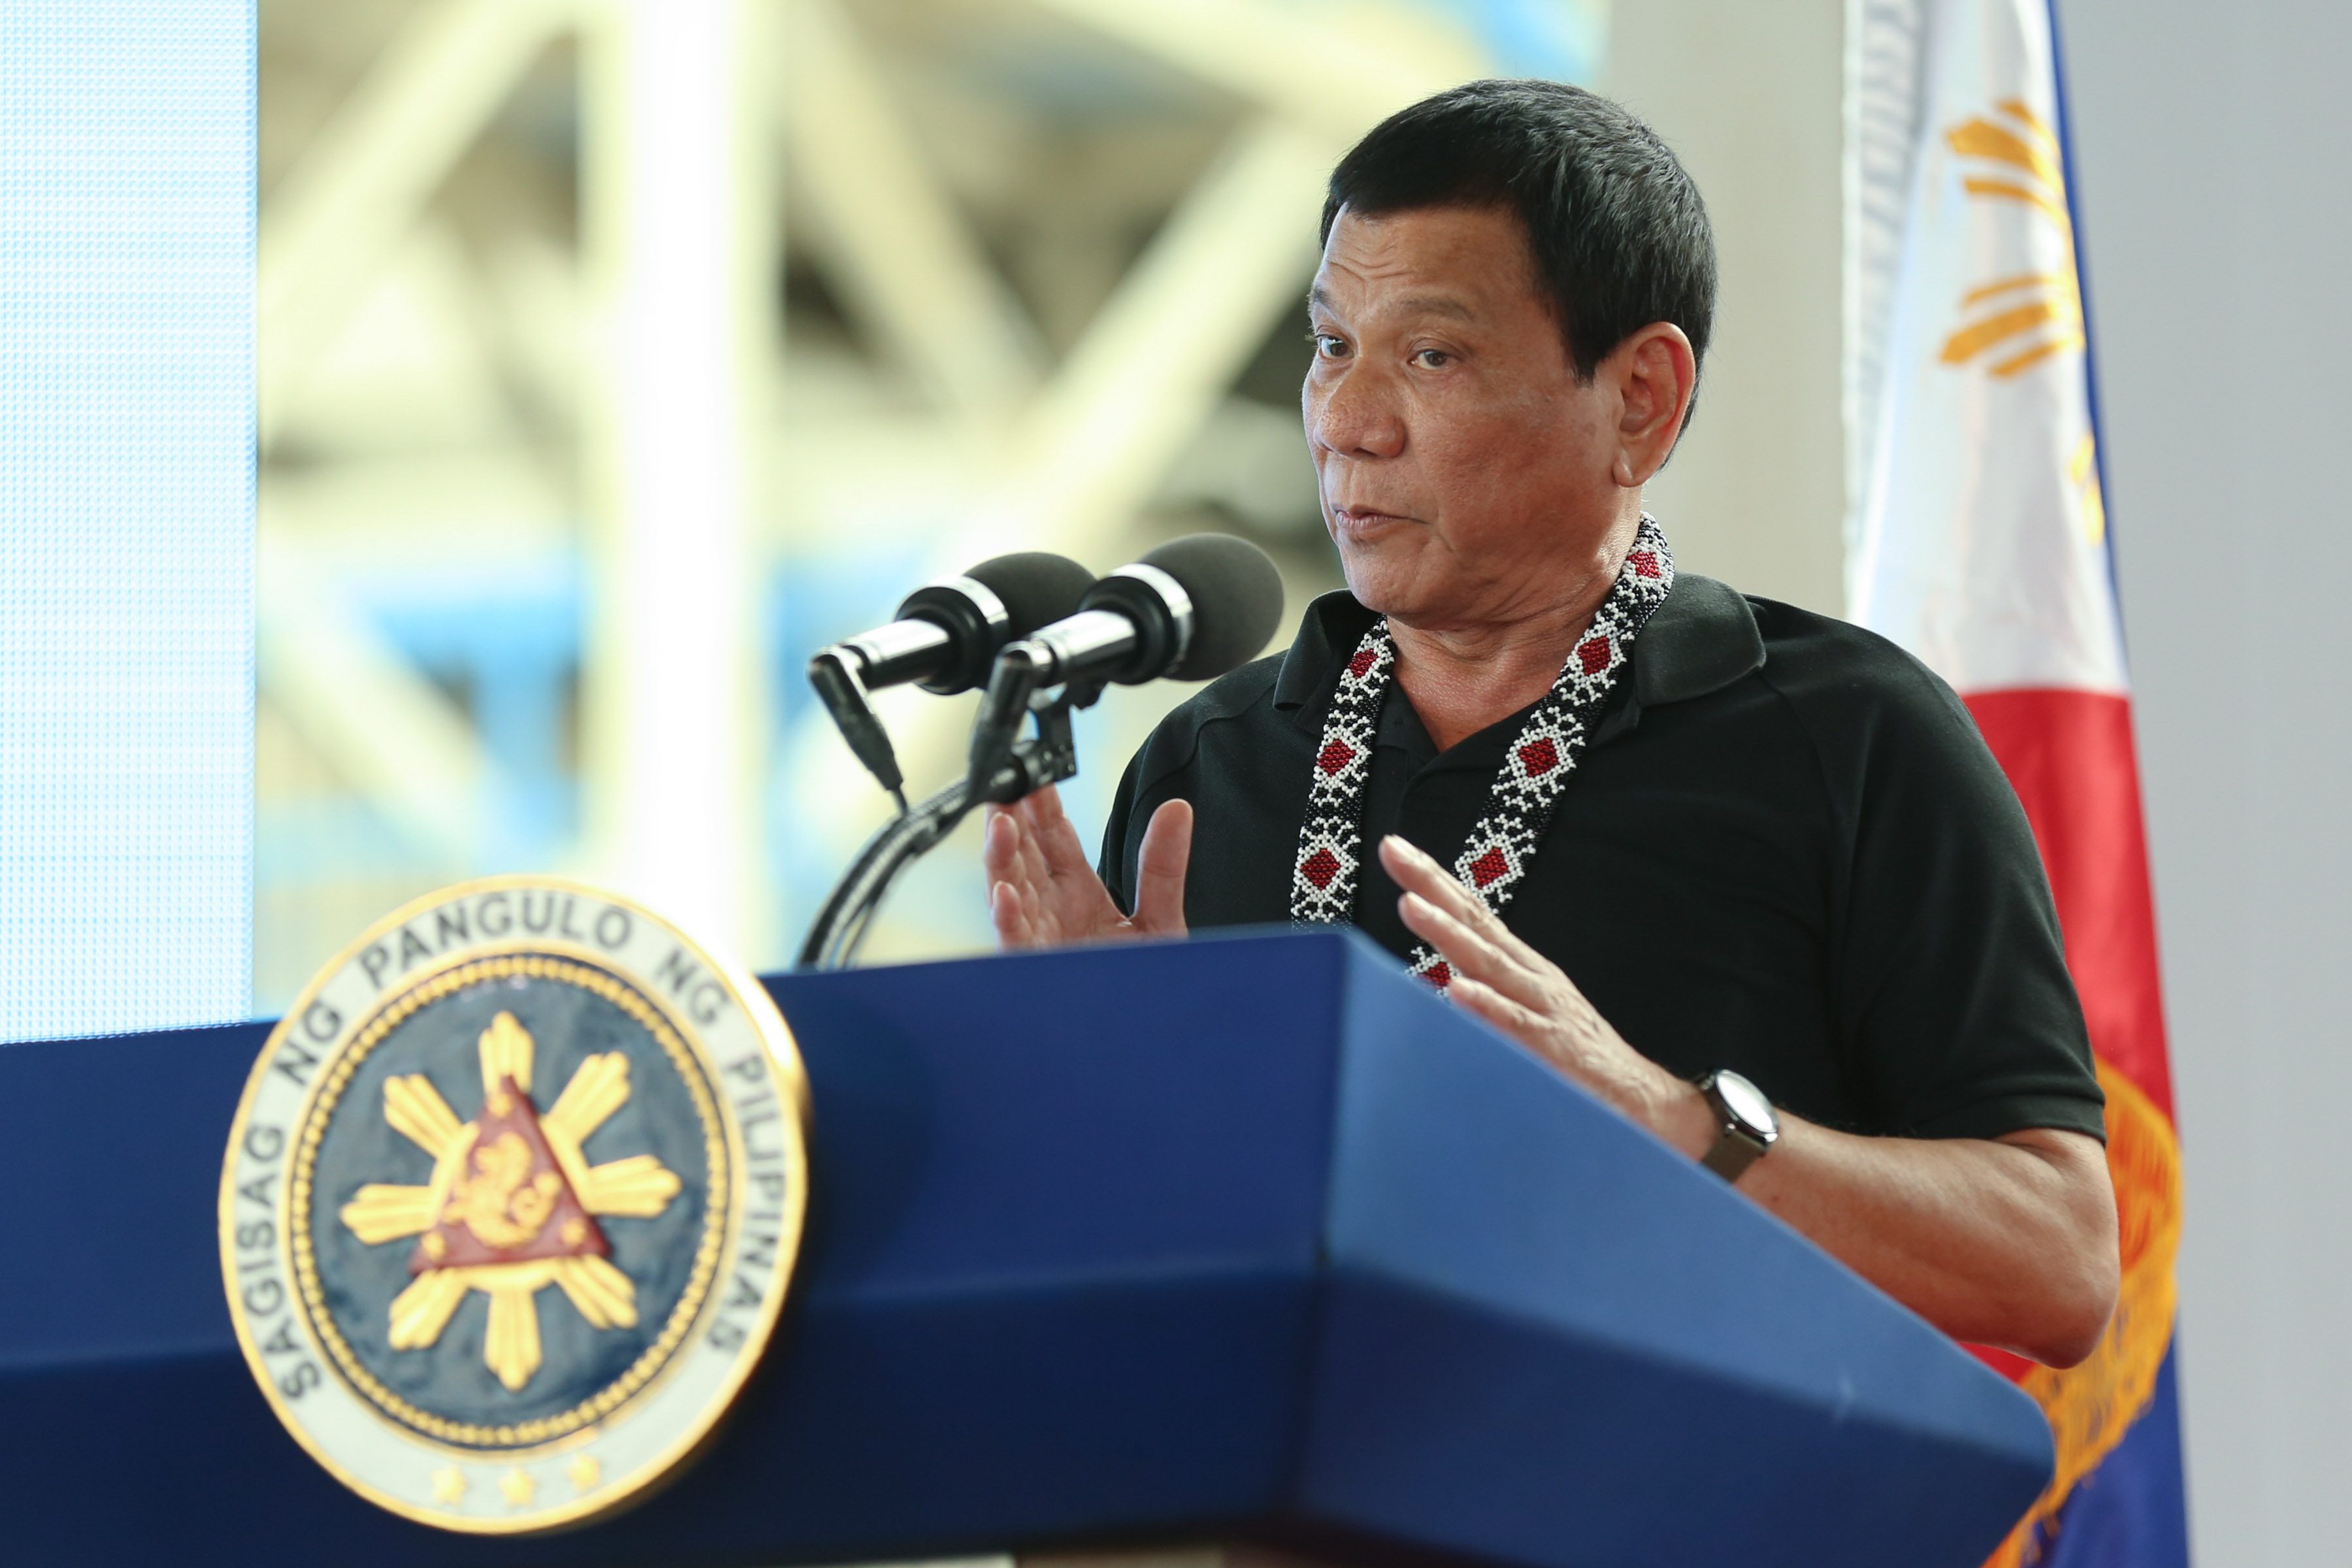 DUTERTE AND CLIMATE CONCERNS. President Rodrigo Duterte gives a speech at the ceremonial switch-on of the Sarangani Energy Corporation Power Plant in Maasim, Sarangani on January 26, 2017. File photo by Karl Normal Alonzo/Presidential Photo 